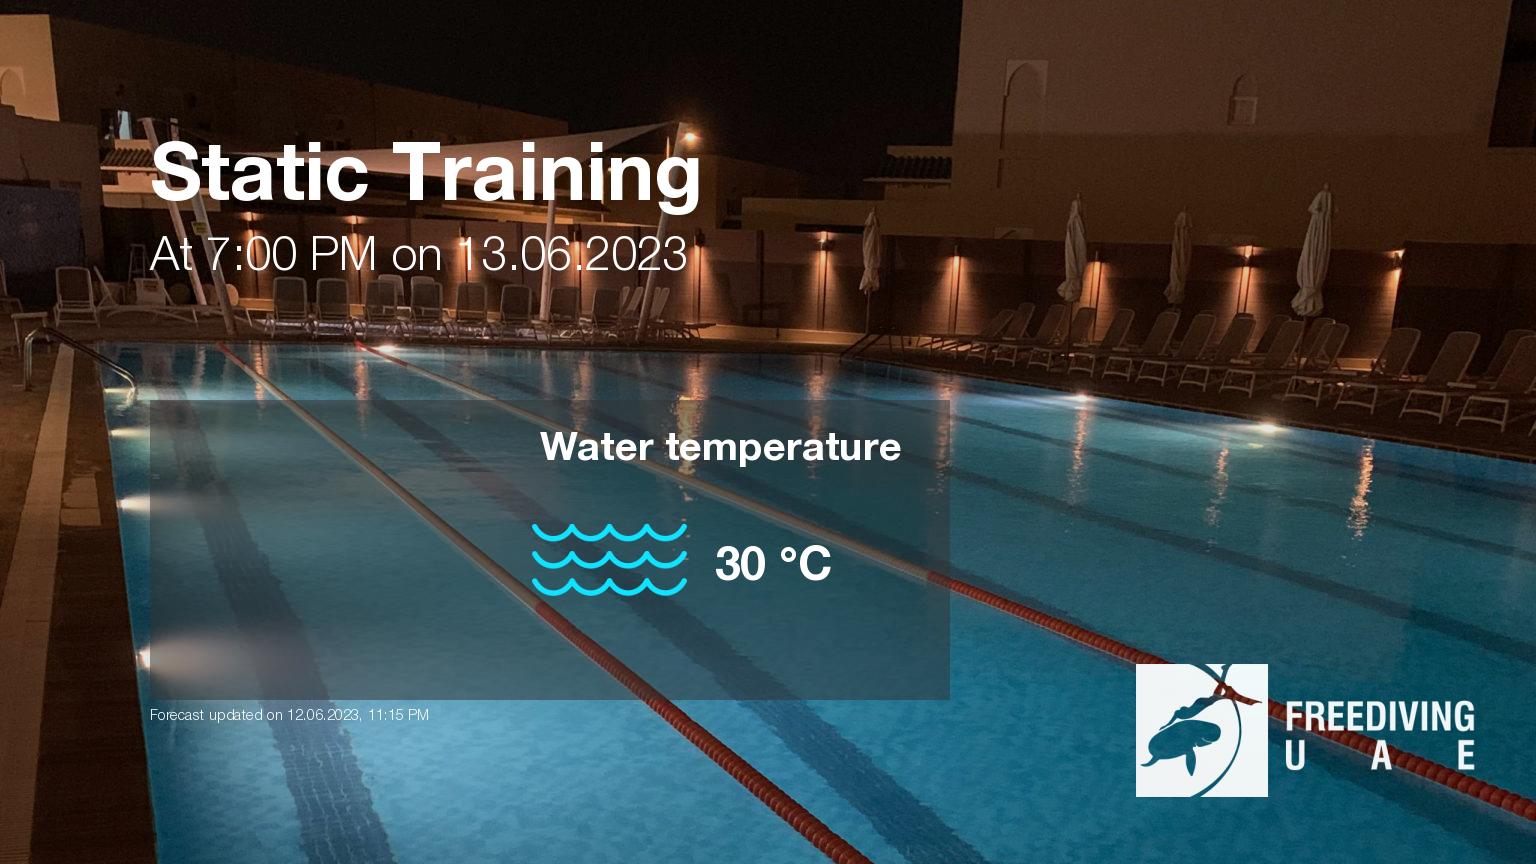 Expected weather during Static Training on Tue, Jun 13, at 7:00 PM